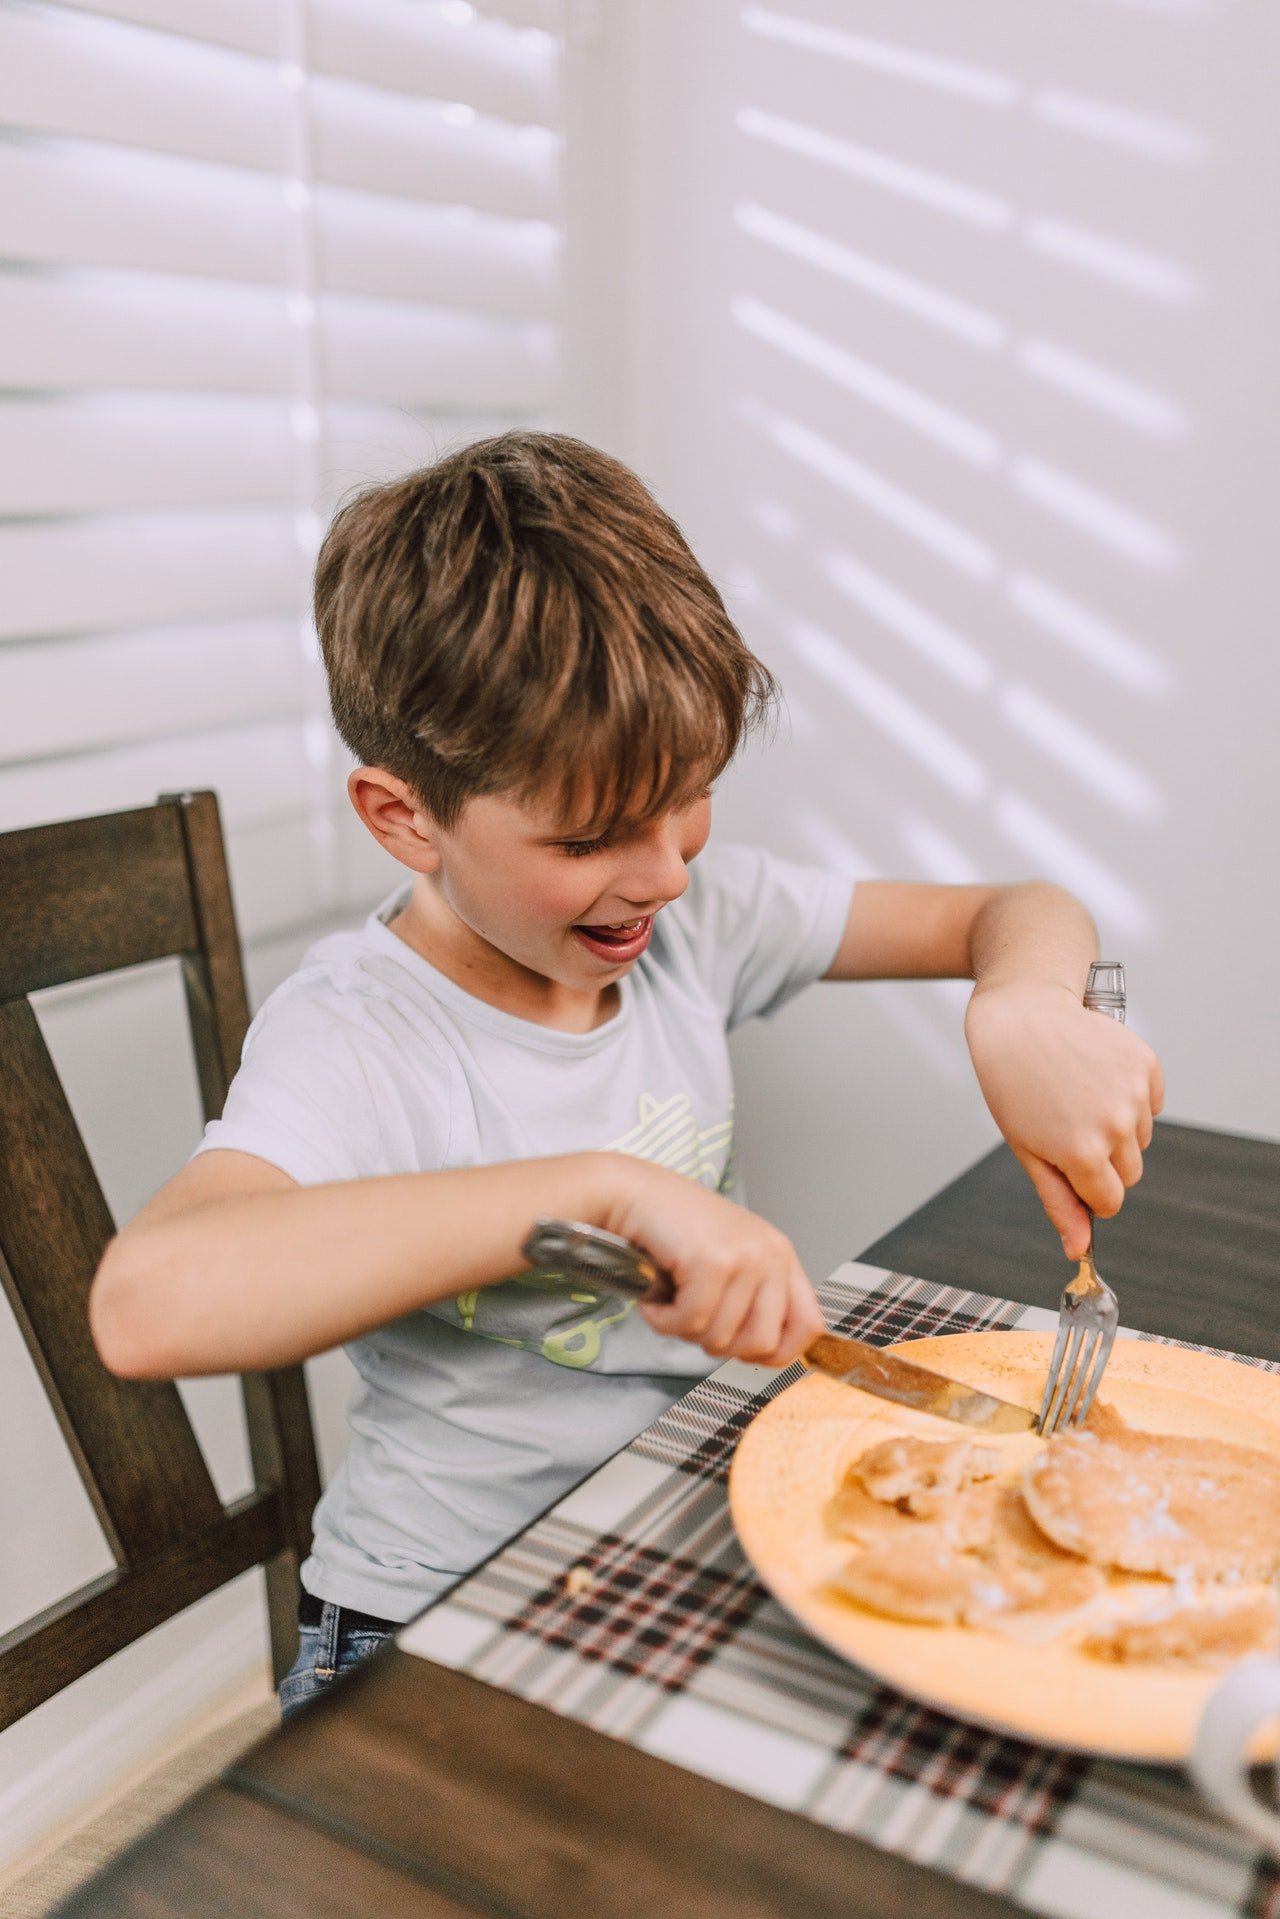 Douglas made him pancakes and asked him what happened last night. | Source: Pexels